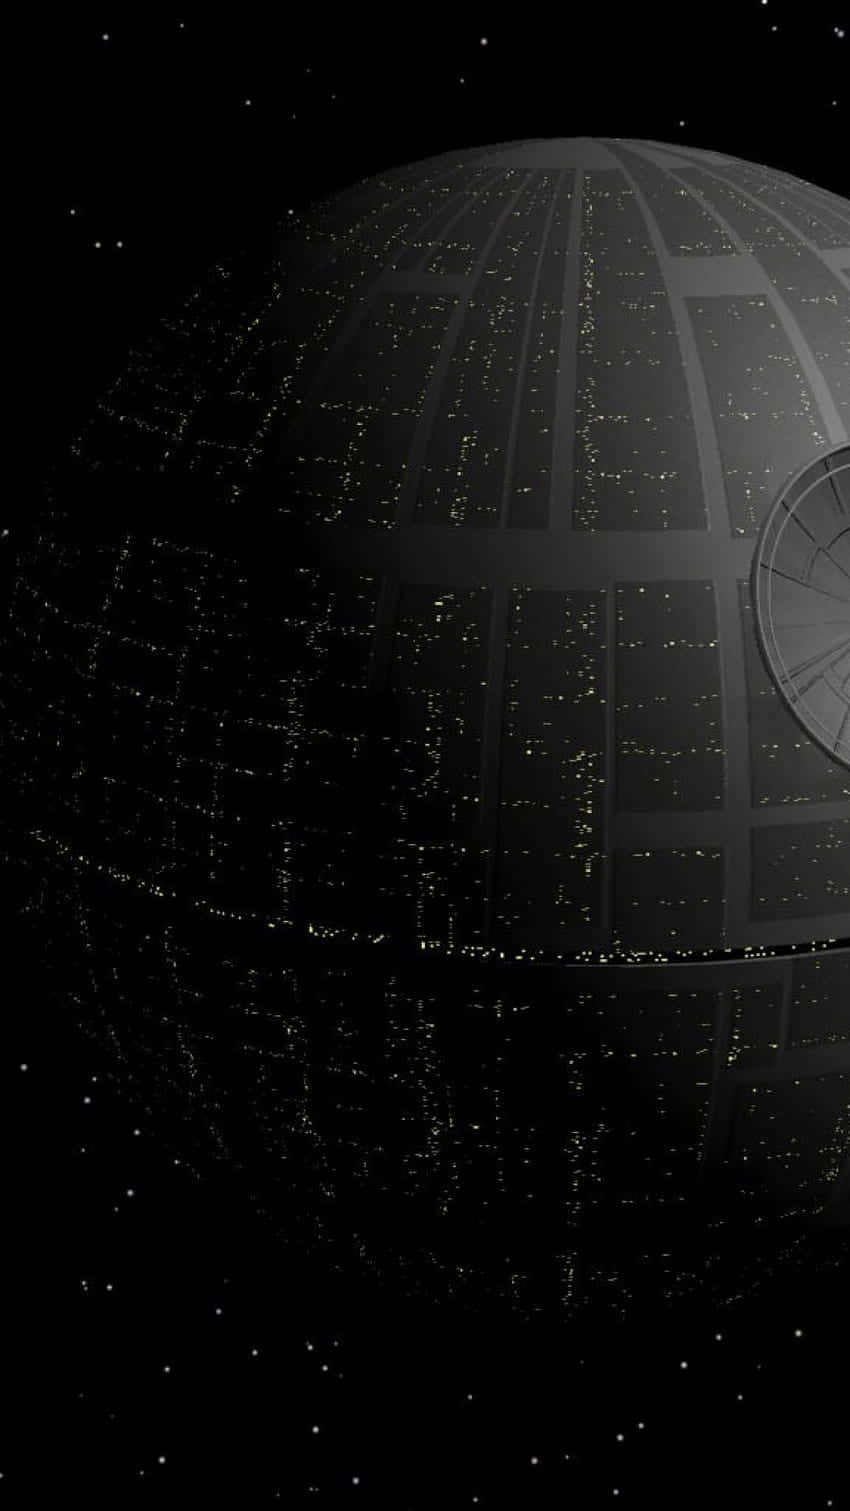 The iconic Death Star looming in the deep space.